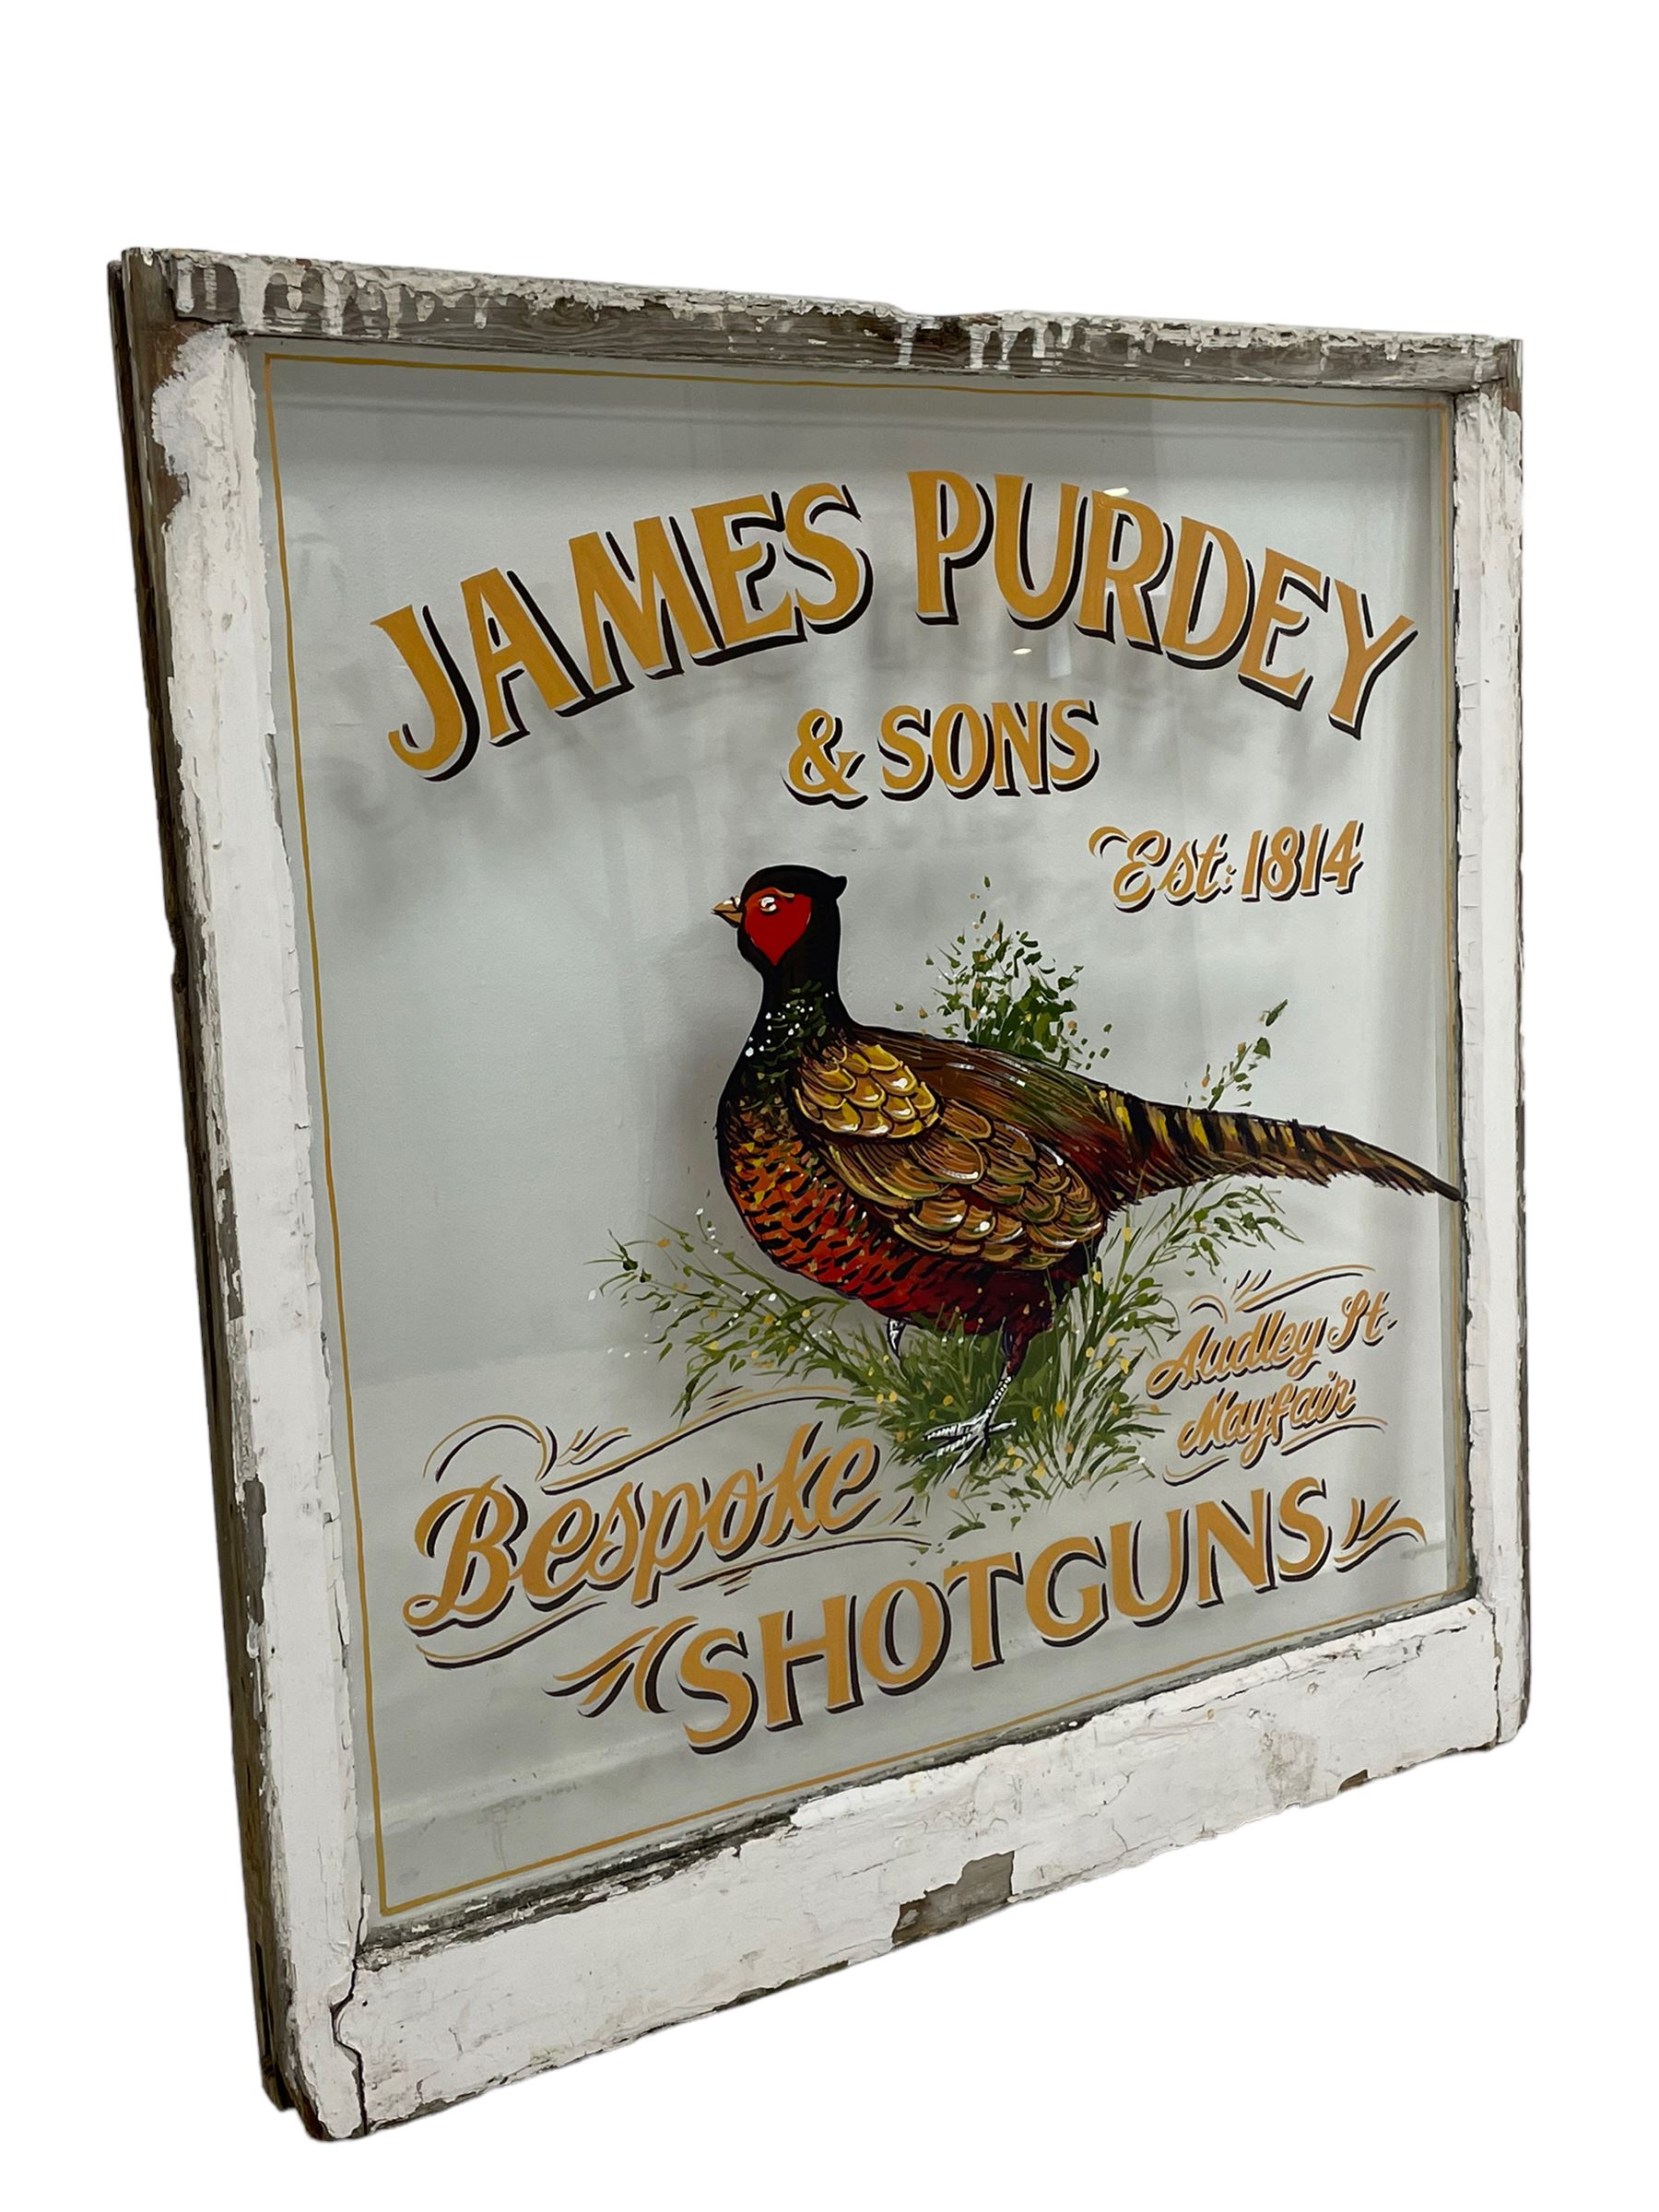 White painted window with hand painted advertising "Purdey and Sons - Image 3 of 5